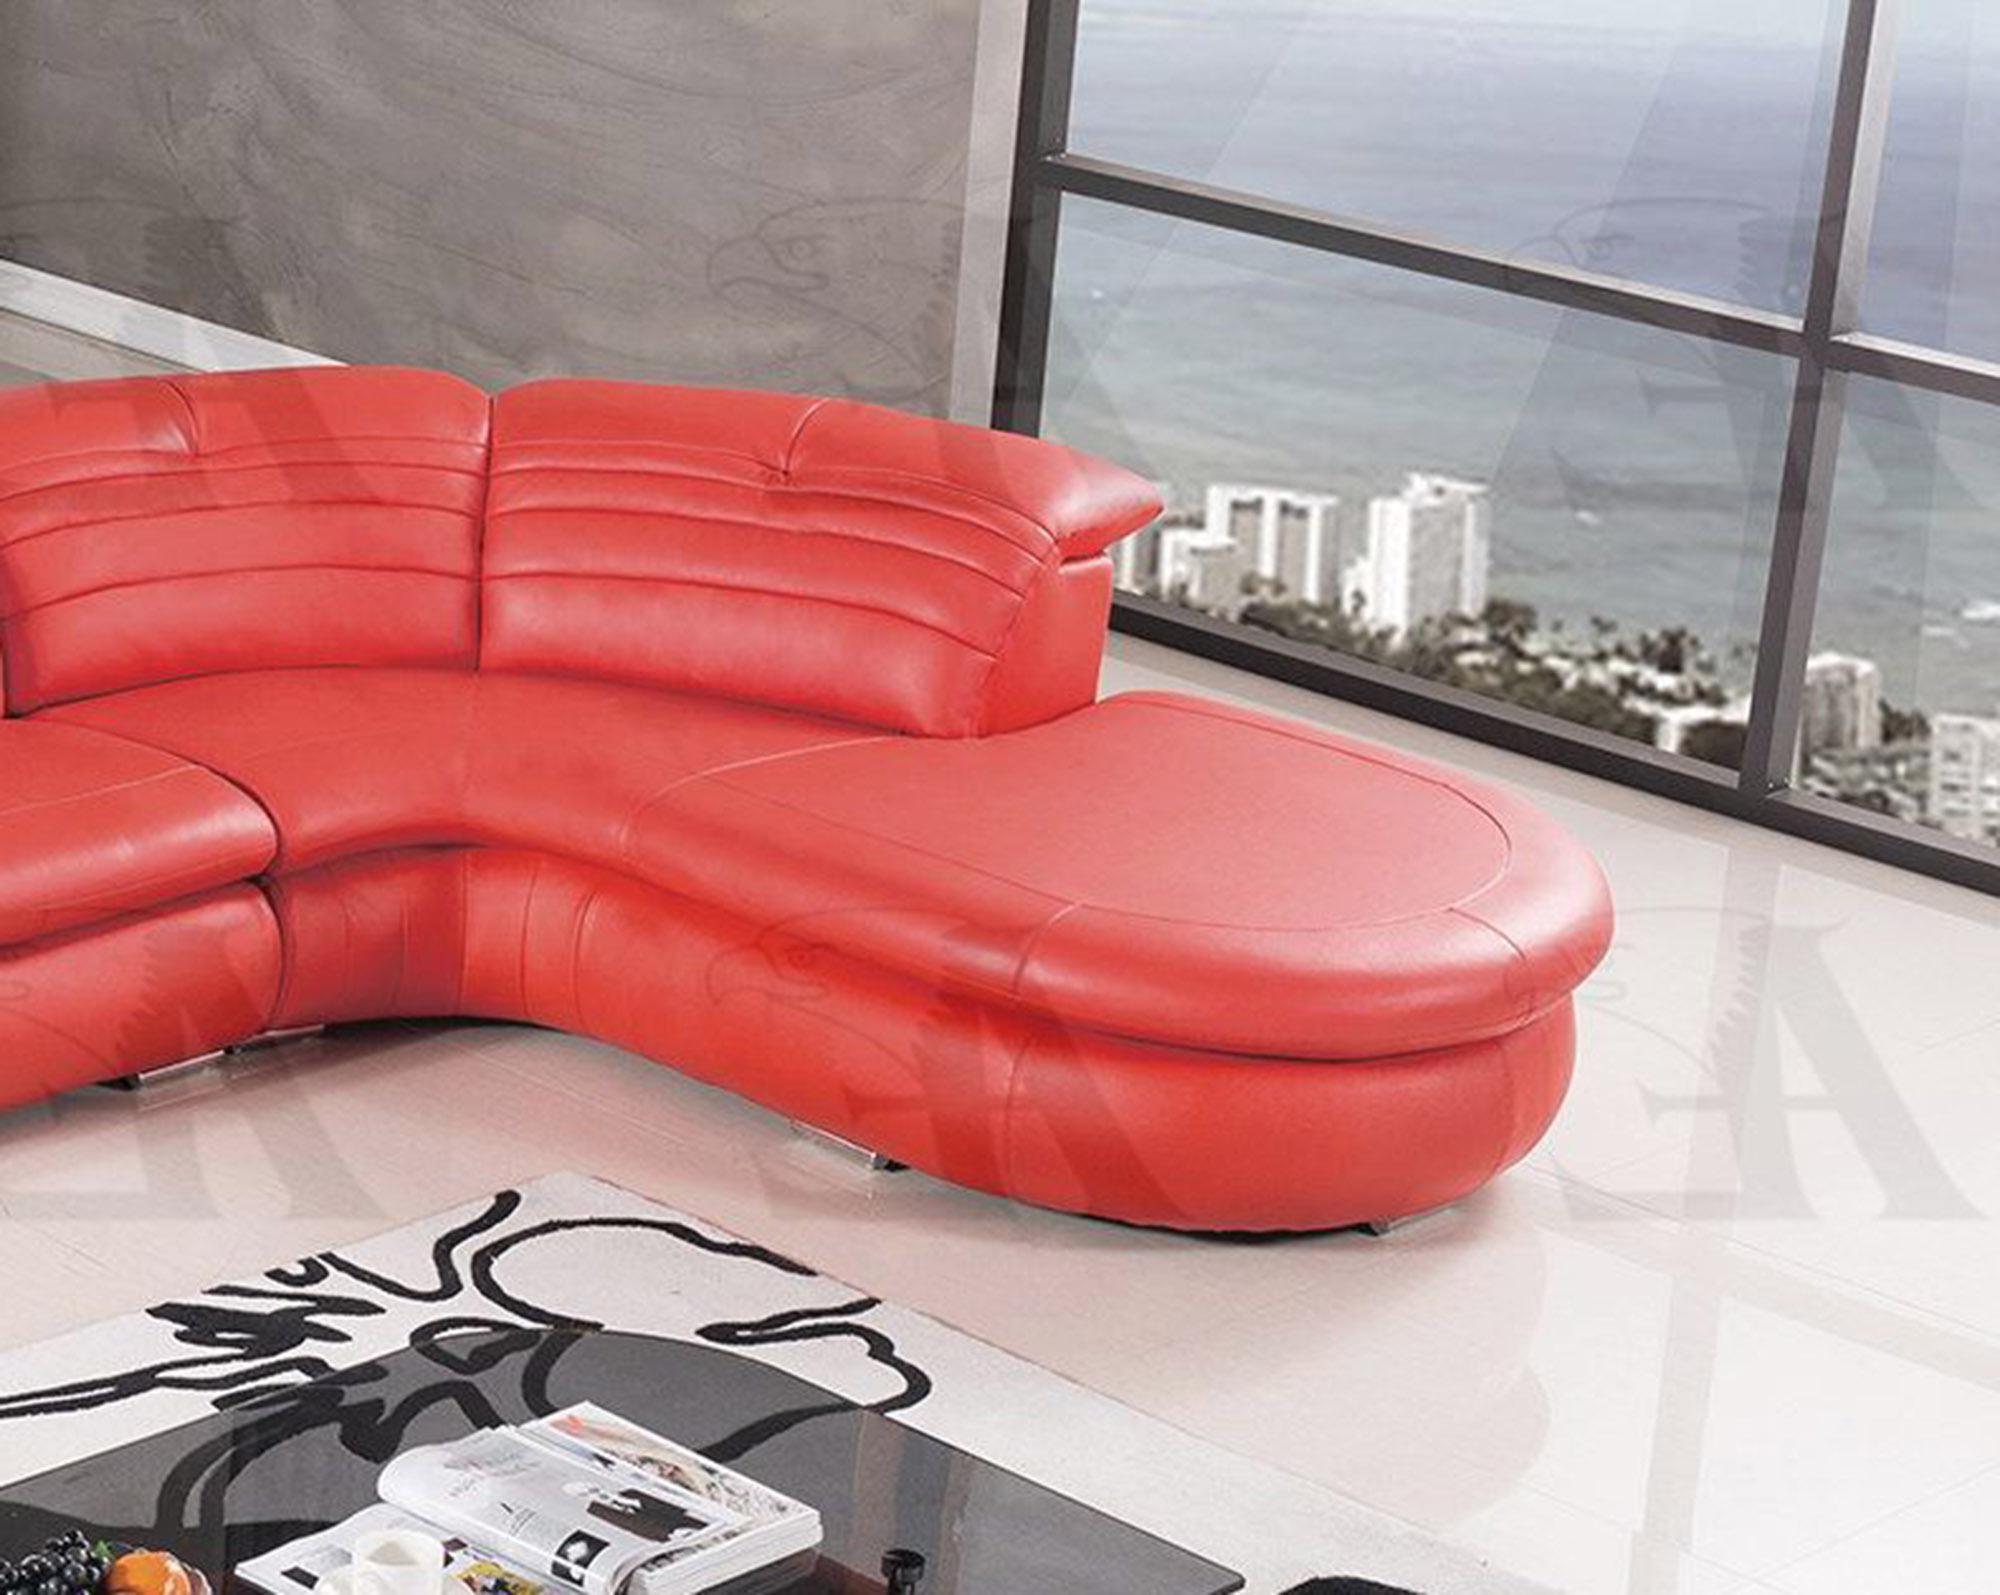 

    
American Eagle Furniture EK-LB119-RED Sofa Chaise Coffe Table and 2 Ottomans Set Red EK-LB119-RED Set-5-RHC
